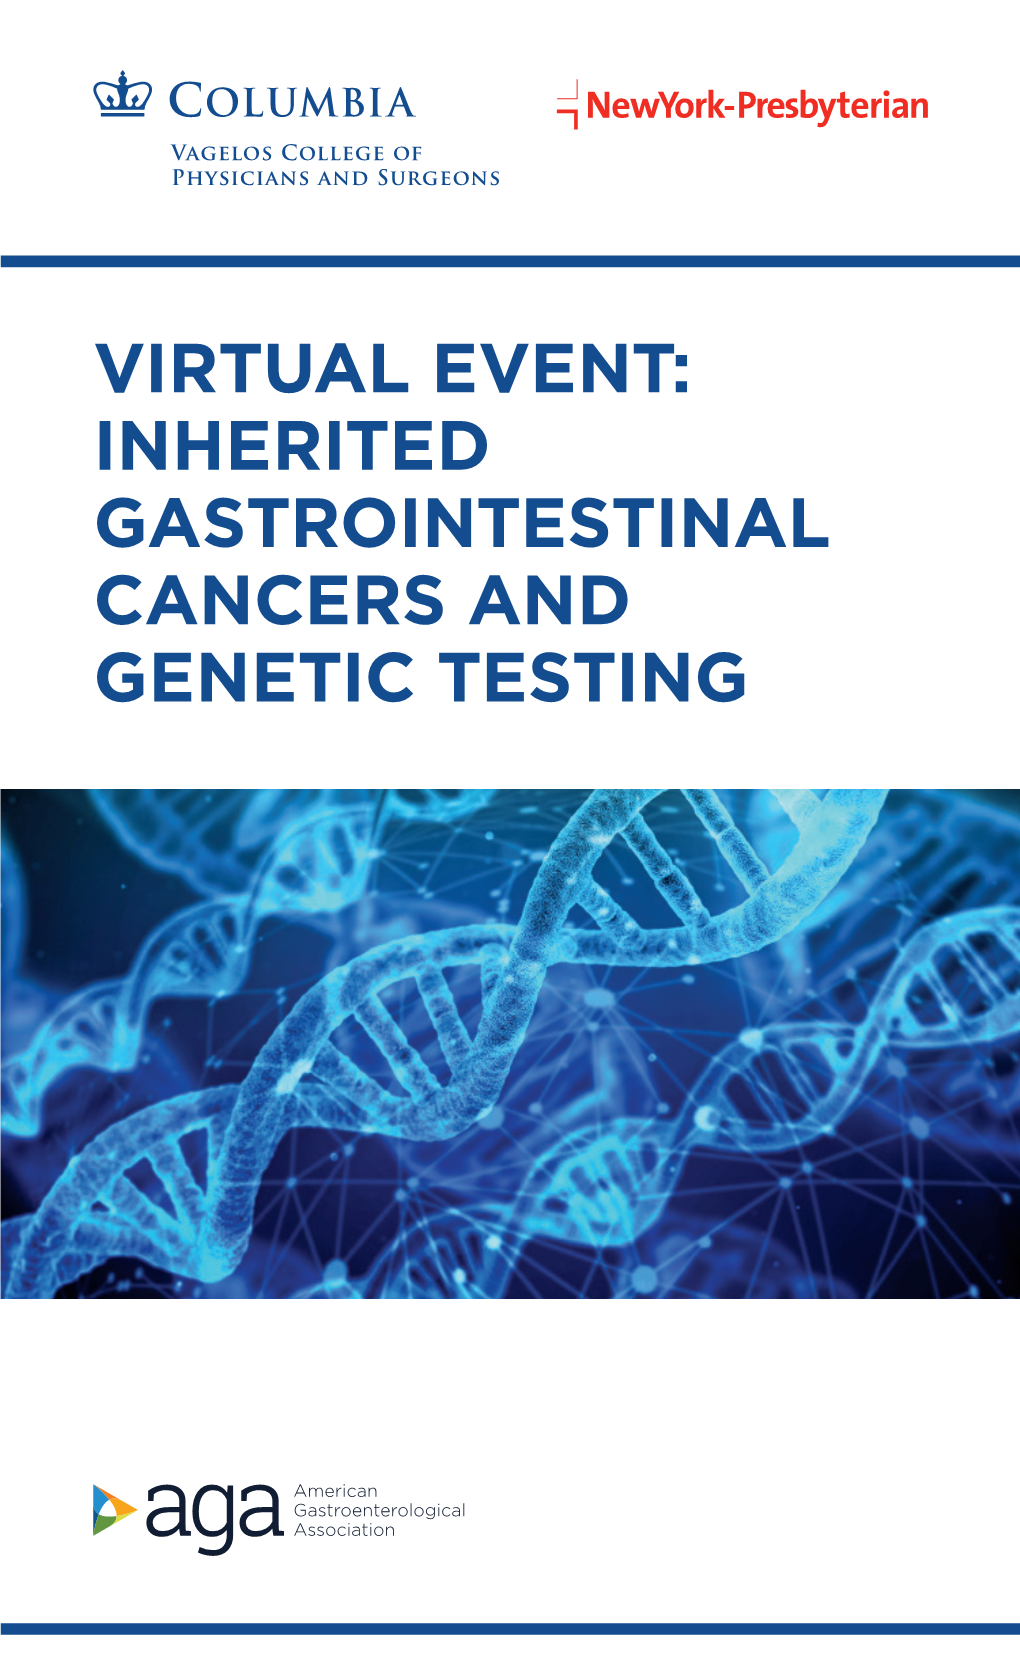 Inherited Gastrointestinal Cancers and Genetic Testing